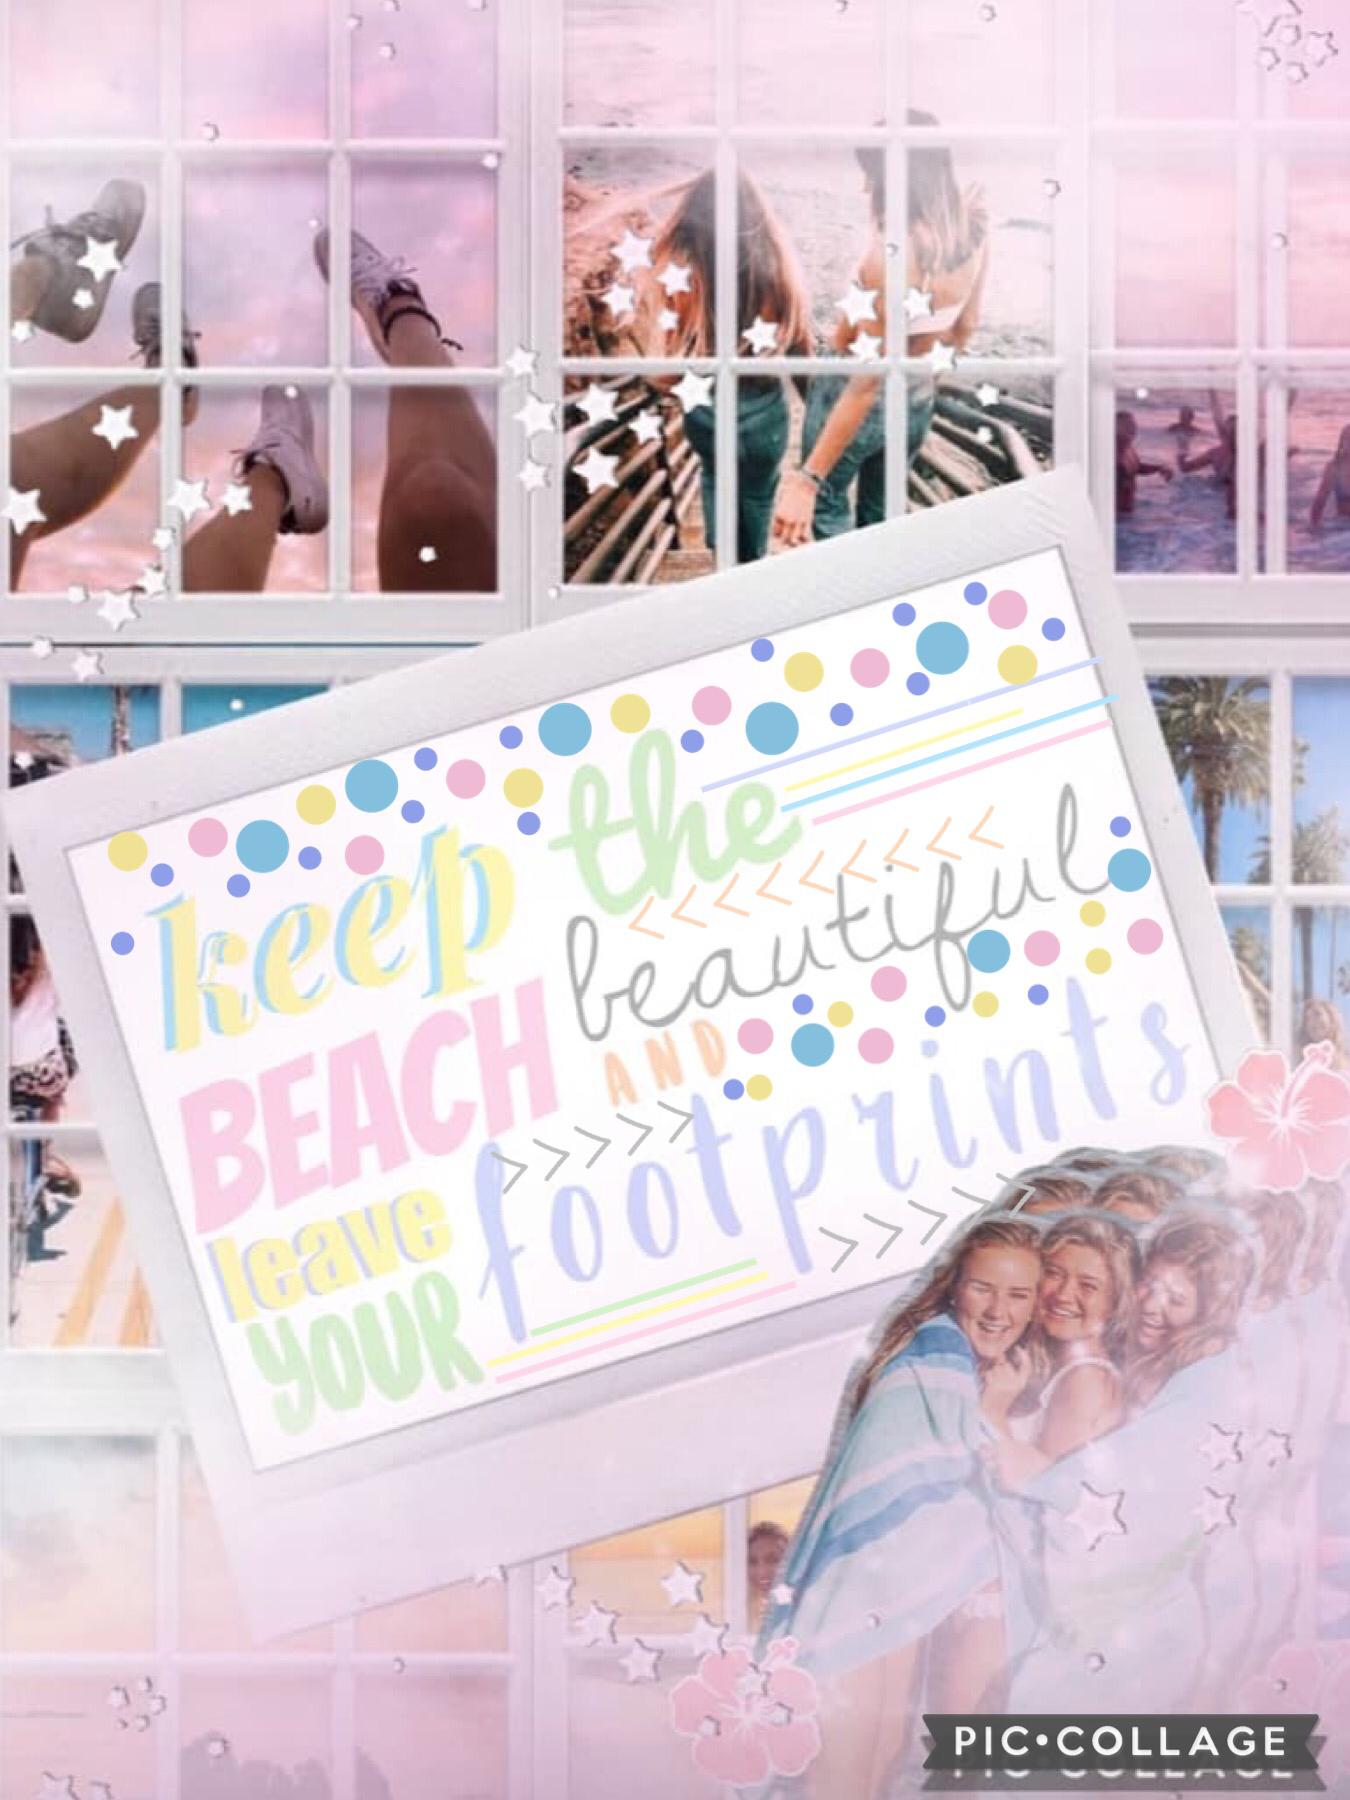 ☀️5/28/21☀️ TAP PLEASE:). Collab with…
The Absolute Amazing.  @Golden-Sunshine!!!
She did the stunning text and I did the bg
Sorry guys for not posting actual collages for so long but I promise I will post more soon!!💕
Qotd:have you ever left PC for a “br